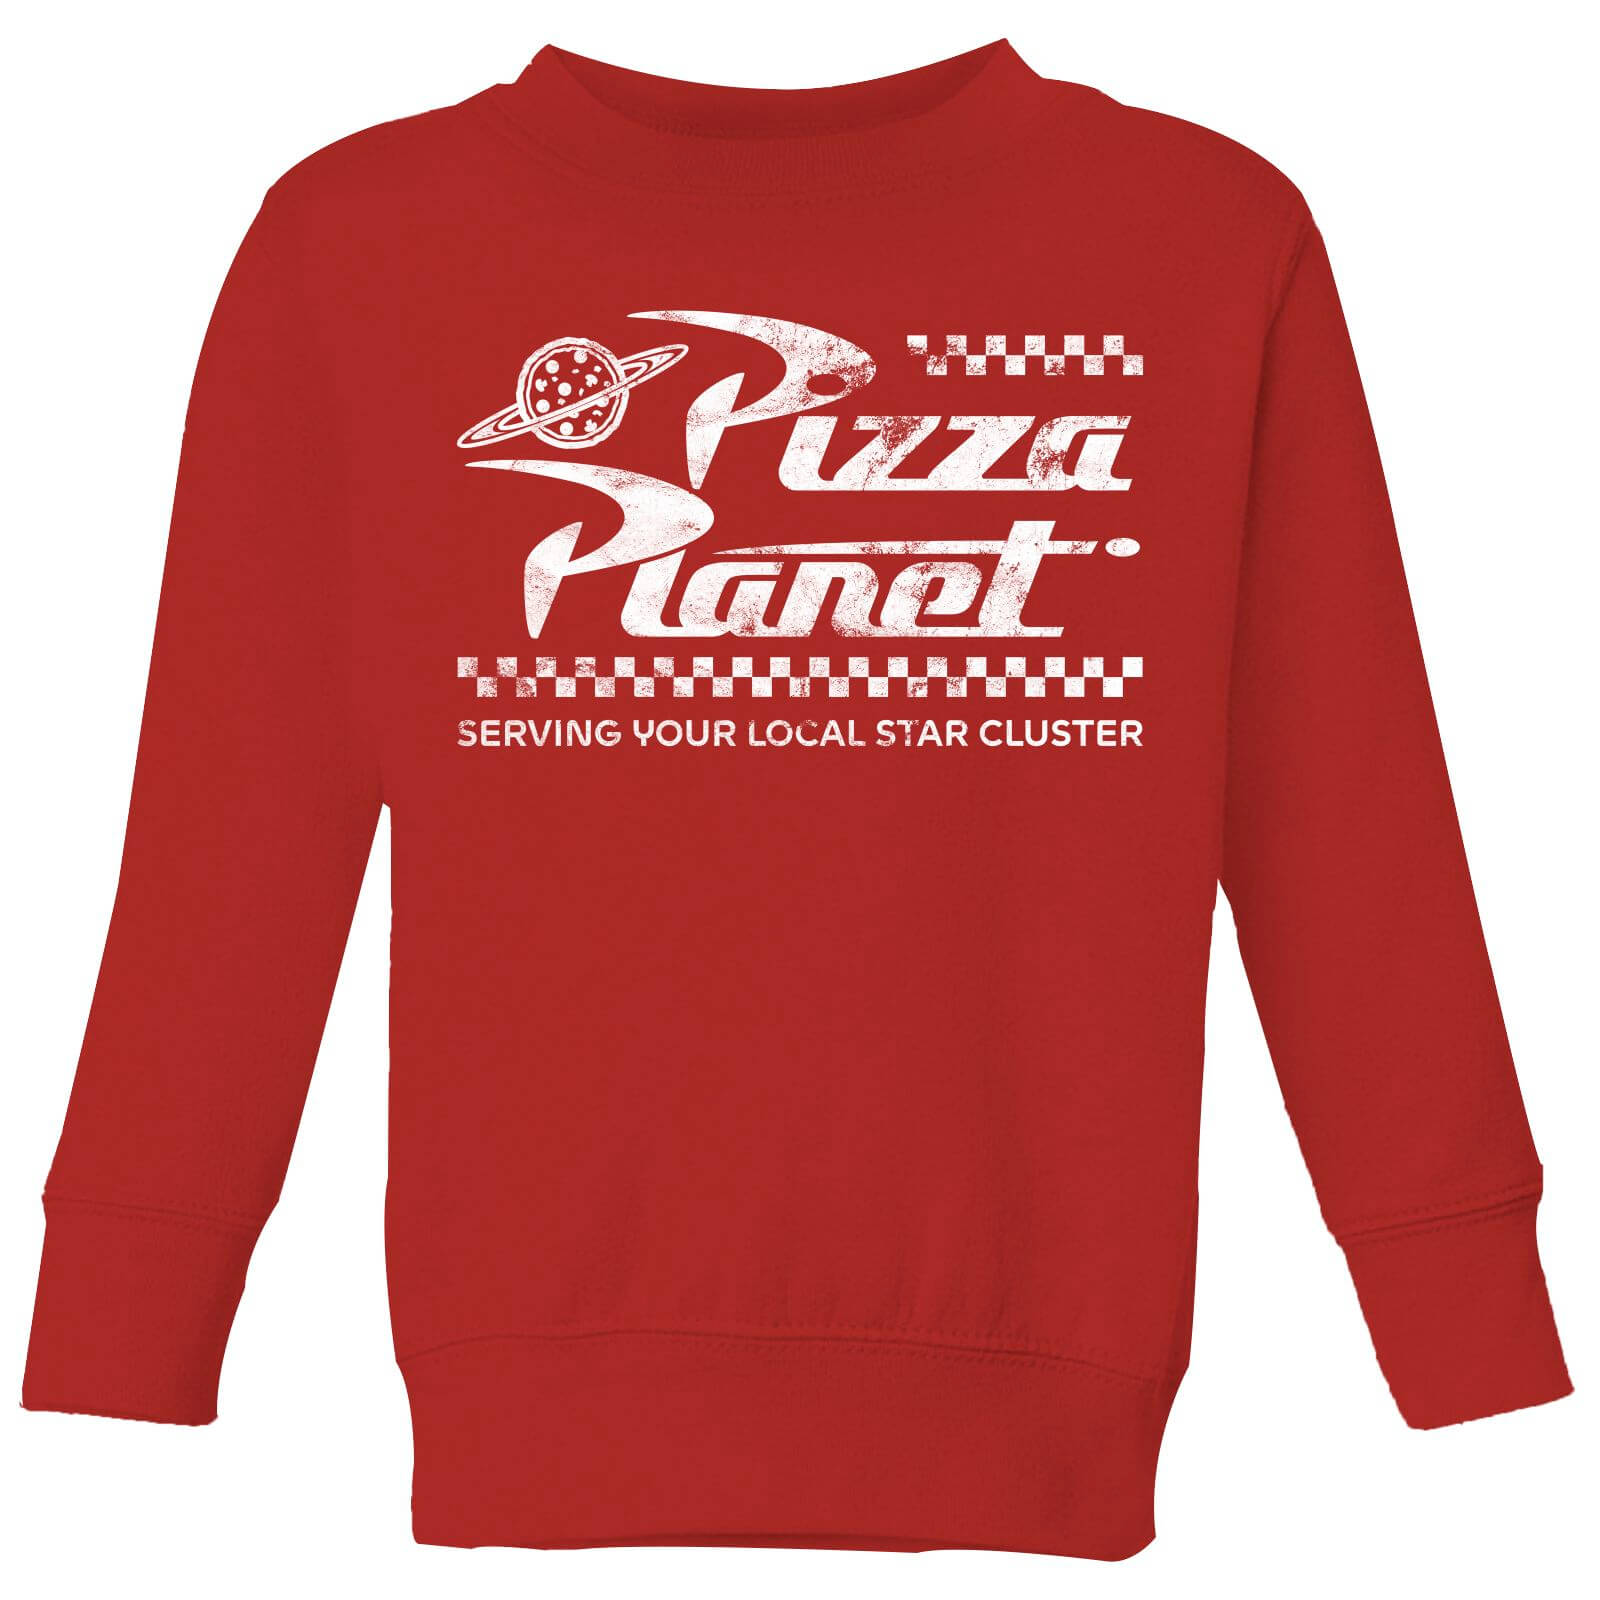 Toy Story x Pizza Planet Crew Kids' Sweatshirt - Red - 3-4 ans